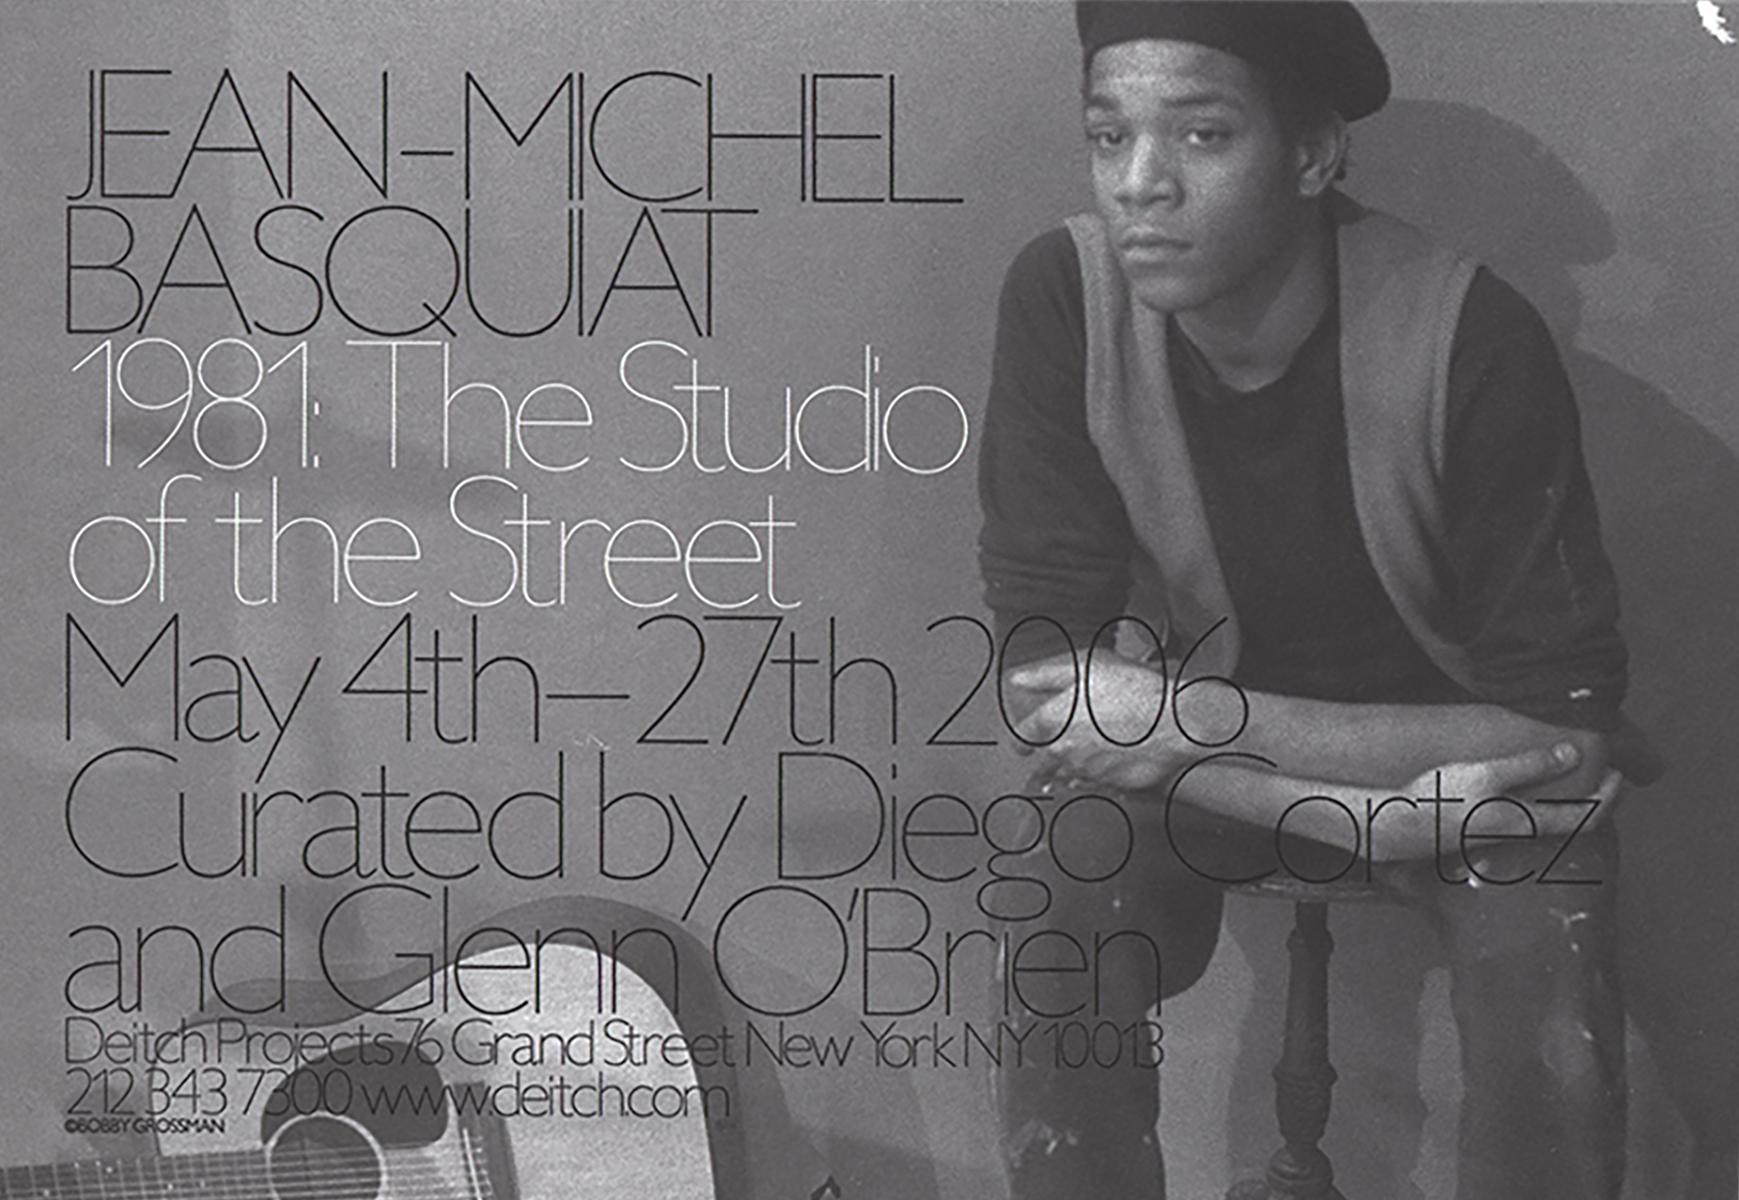 Basquiat Downtown 81:
A collection of two announcements, one press-release for Jean-Michel Basquiat, 1981: The Studio of the Street, Curated by Diego Cortez & Glenn O’Brien, Deitch Projects, NYC 2006 and one Japanese promotional book for the